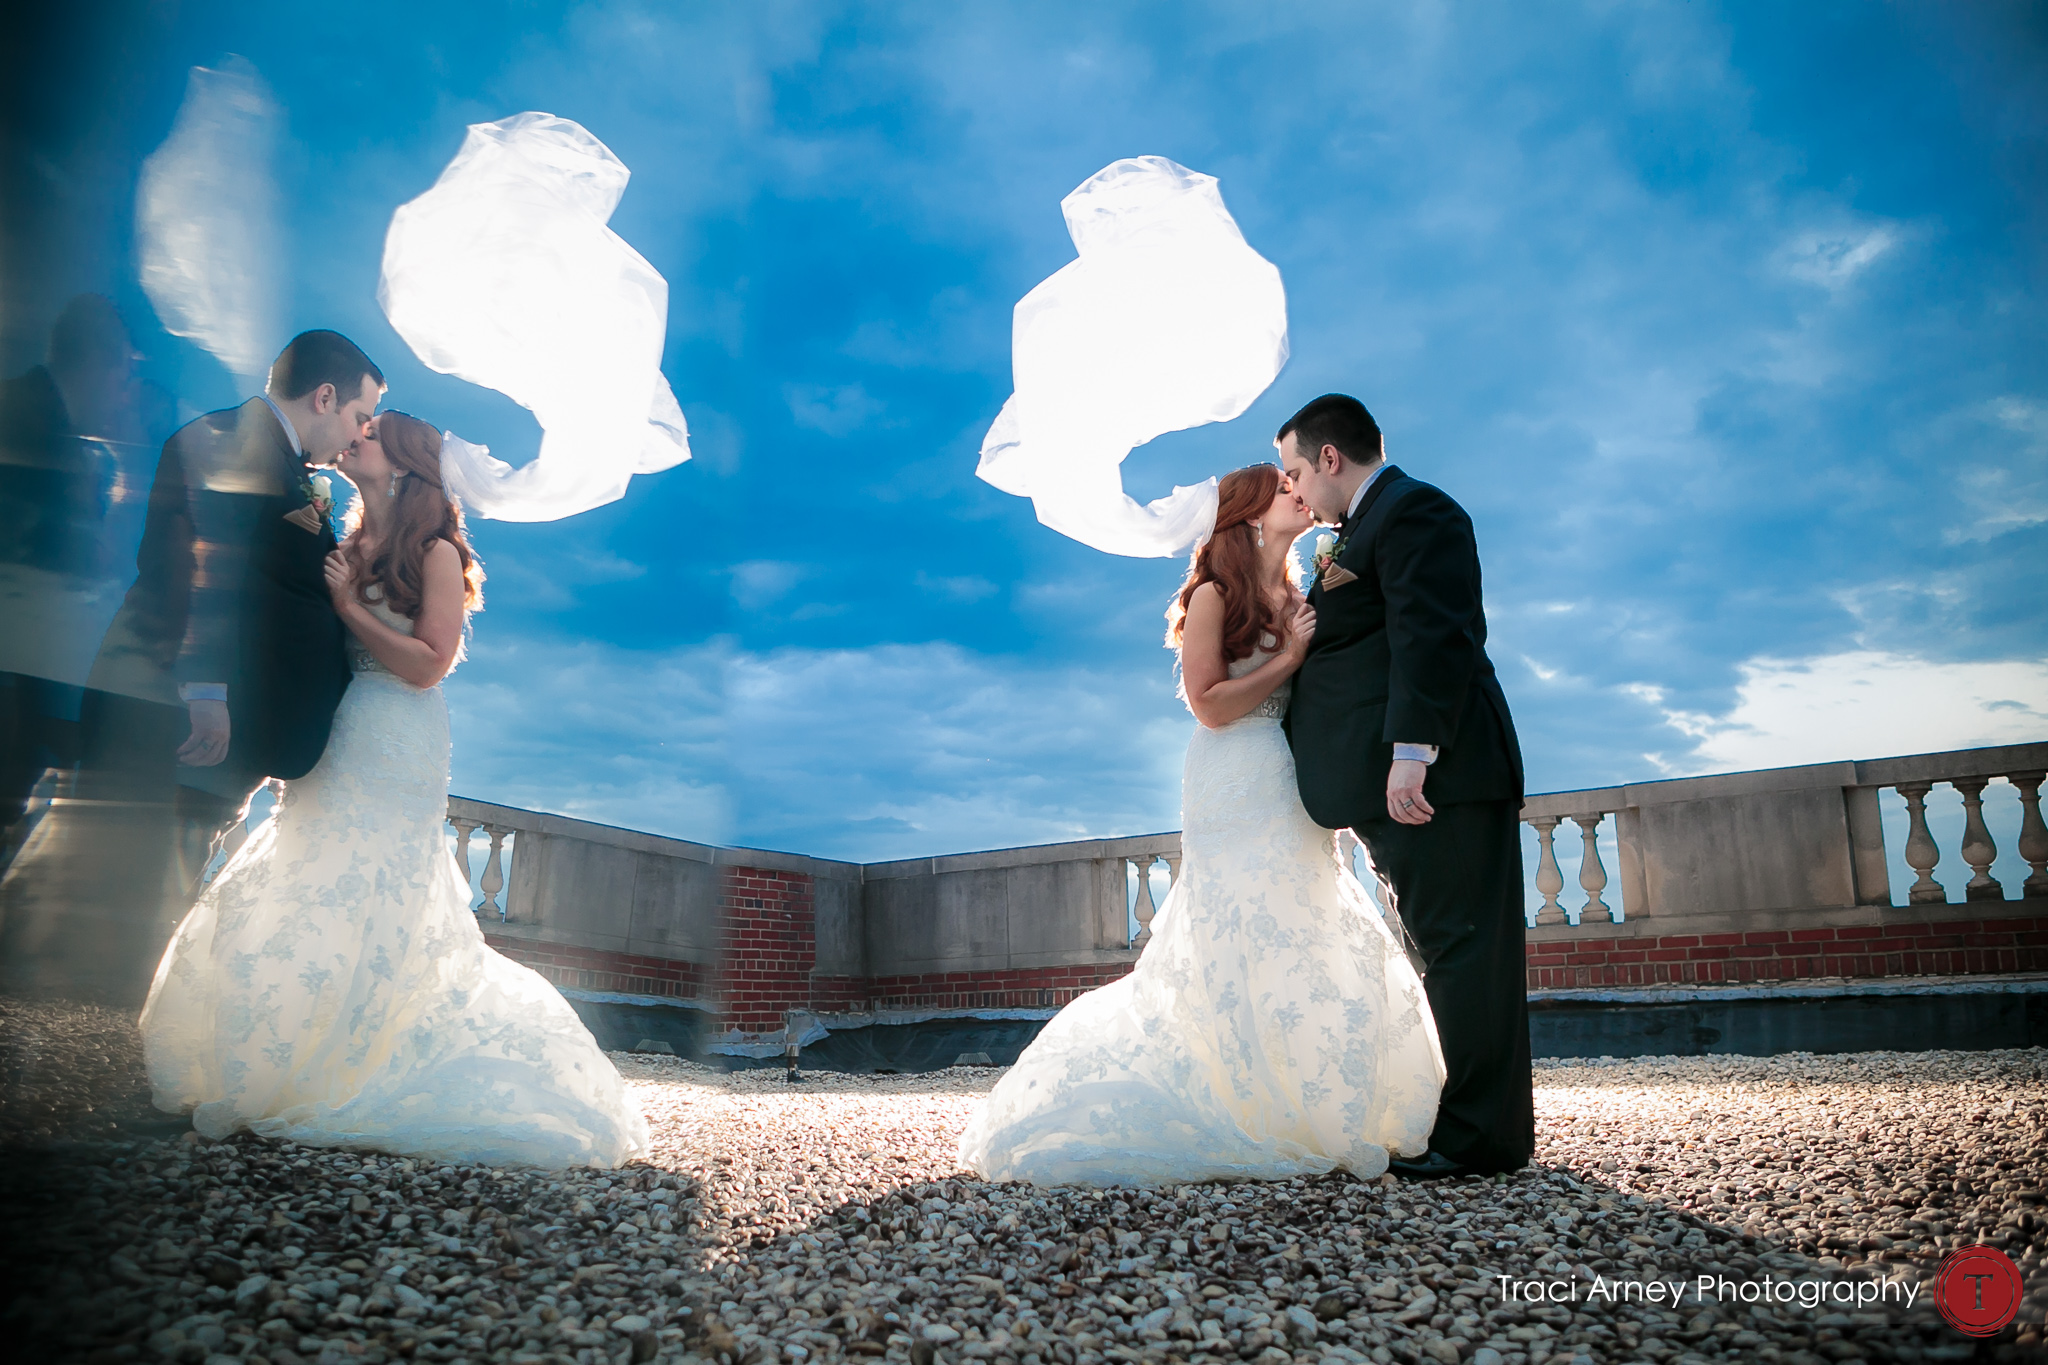 Mirrored bride and groom with backlit veil and blue skies at their wedding at Millennium Center in Winston-Salem, NC.